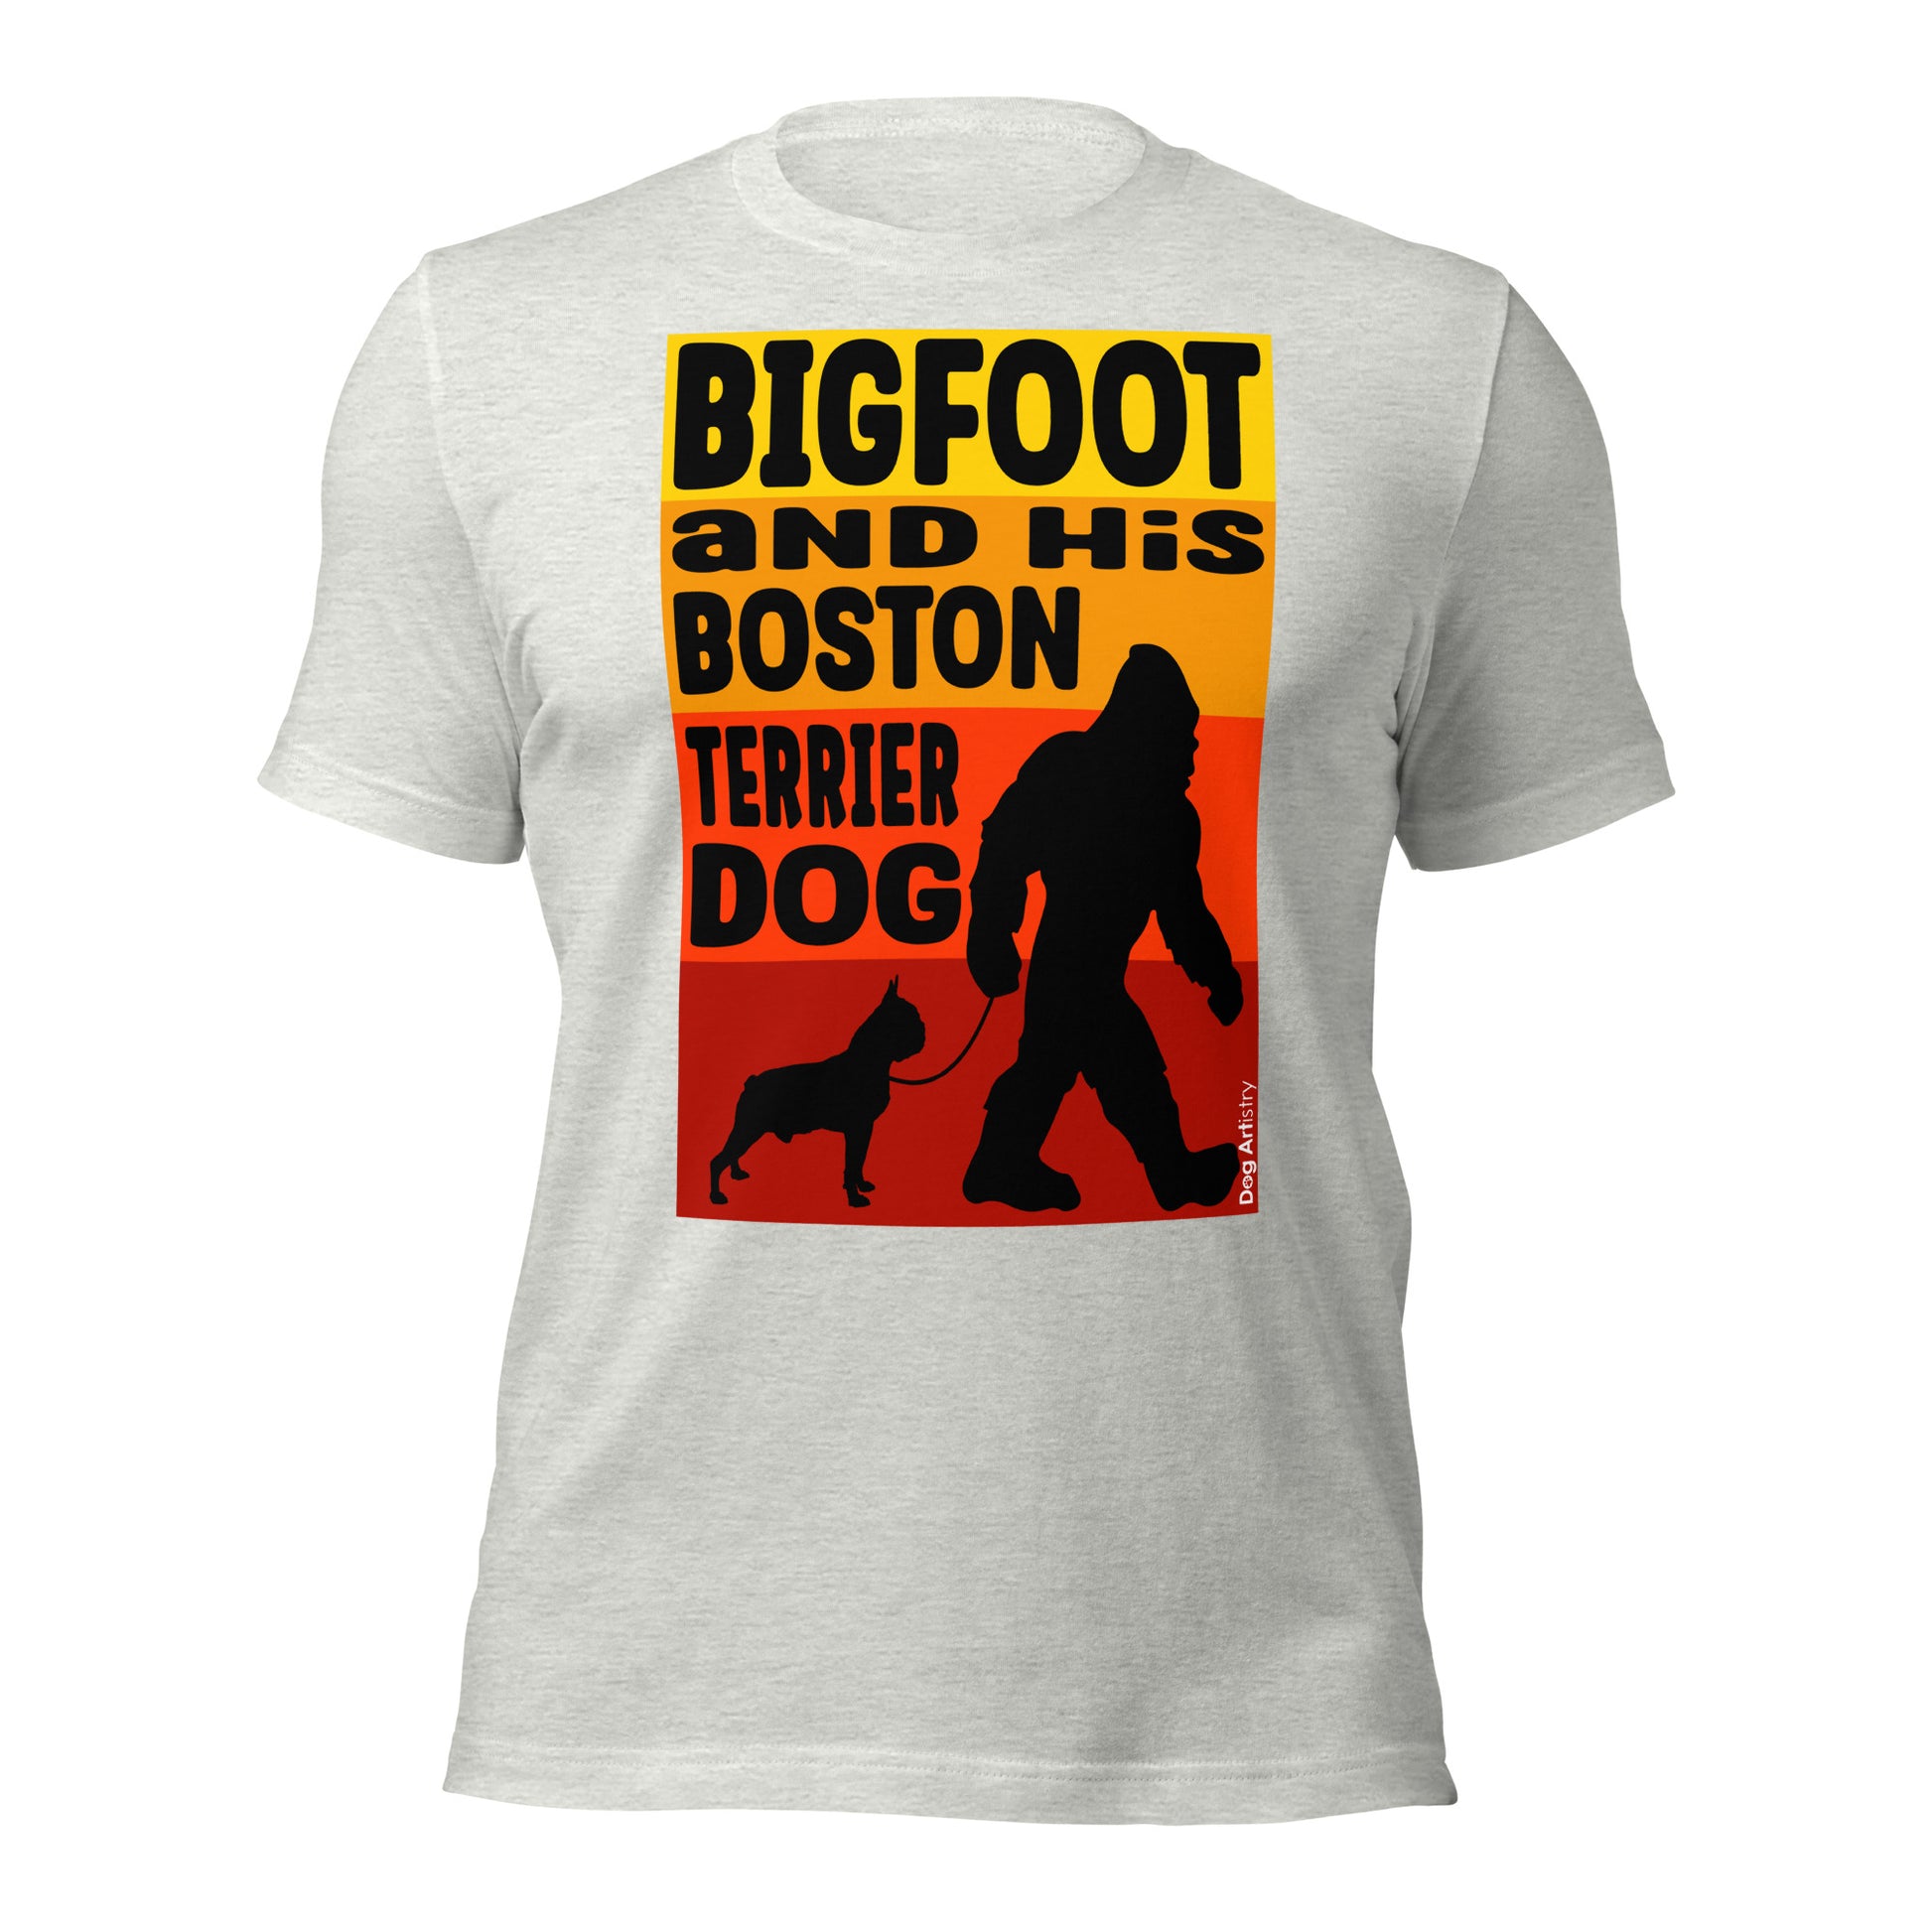 Big foot and his Boston Terrier unisex ash t-shirt by Dog Artistry.